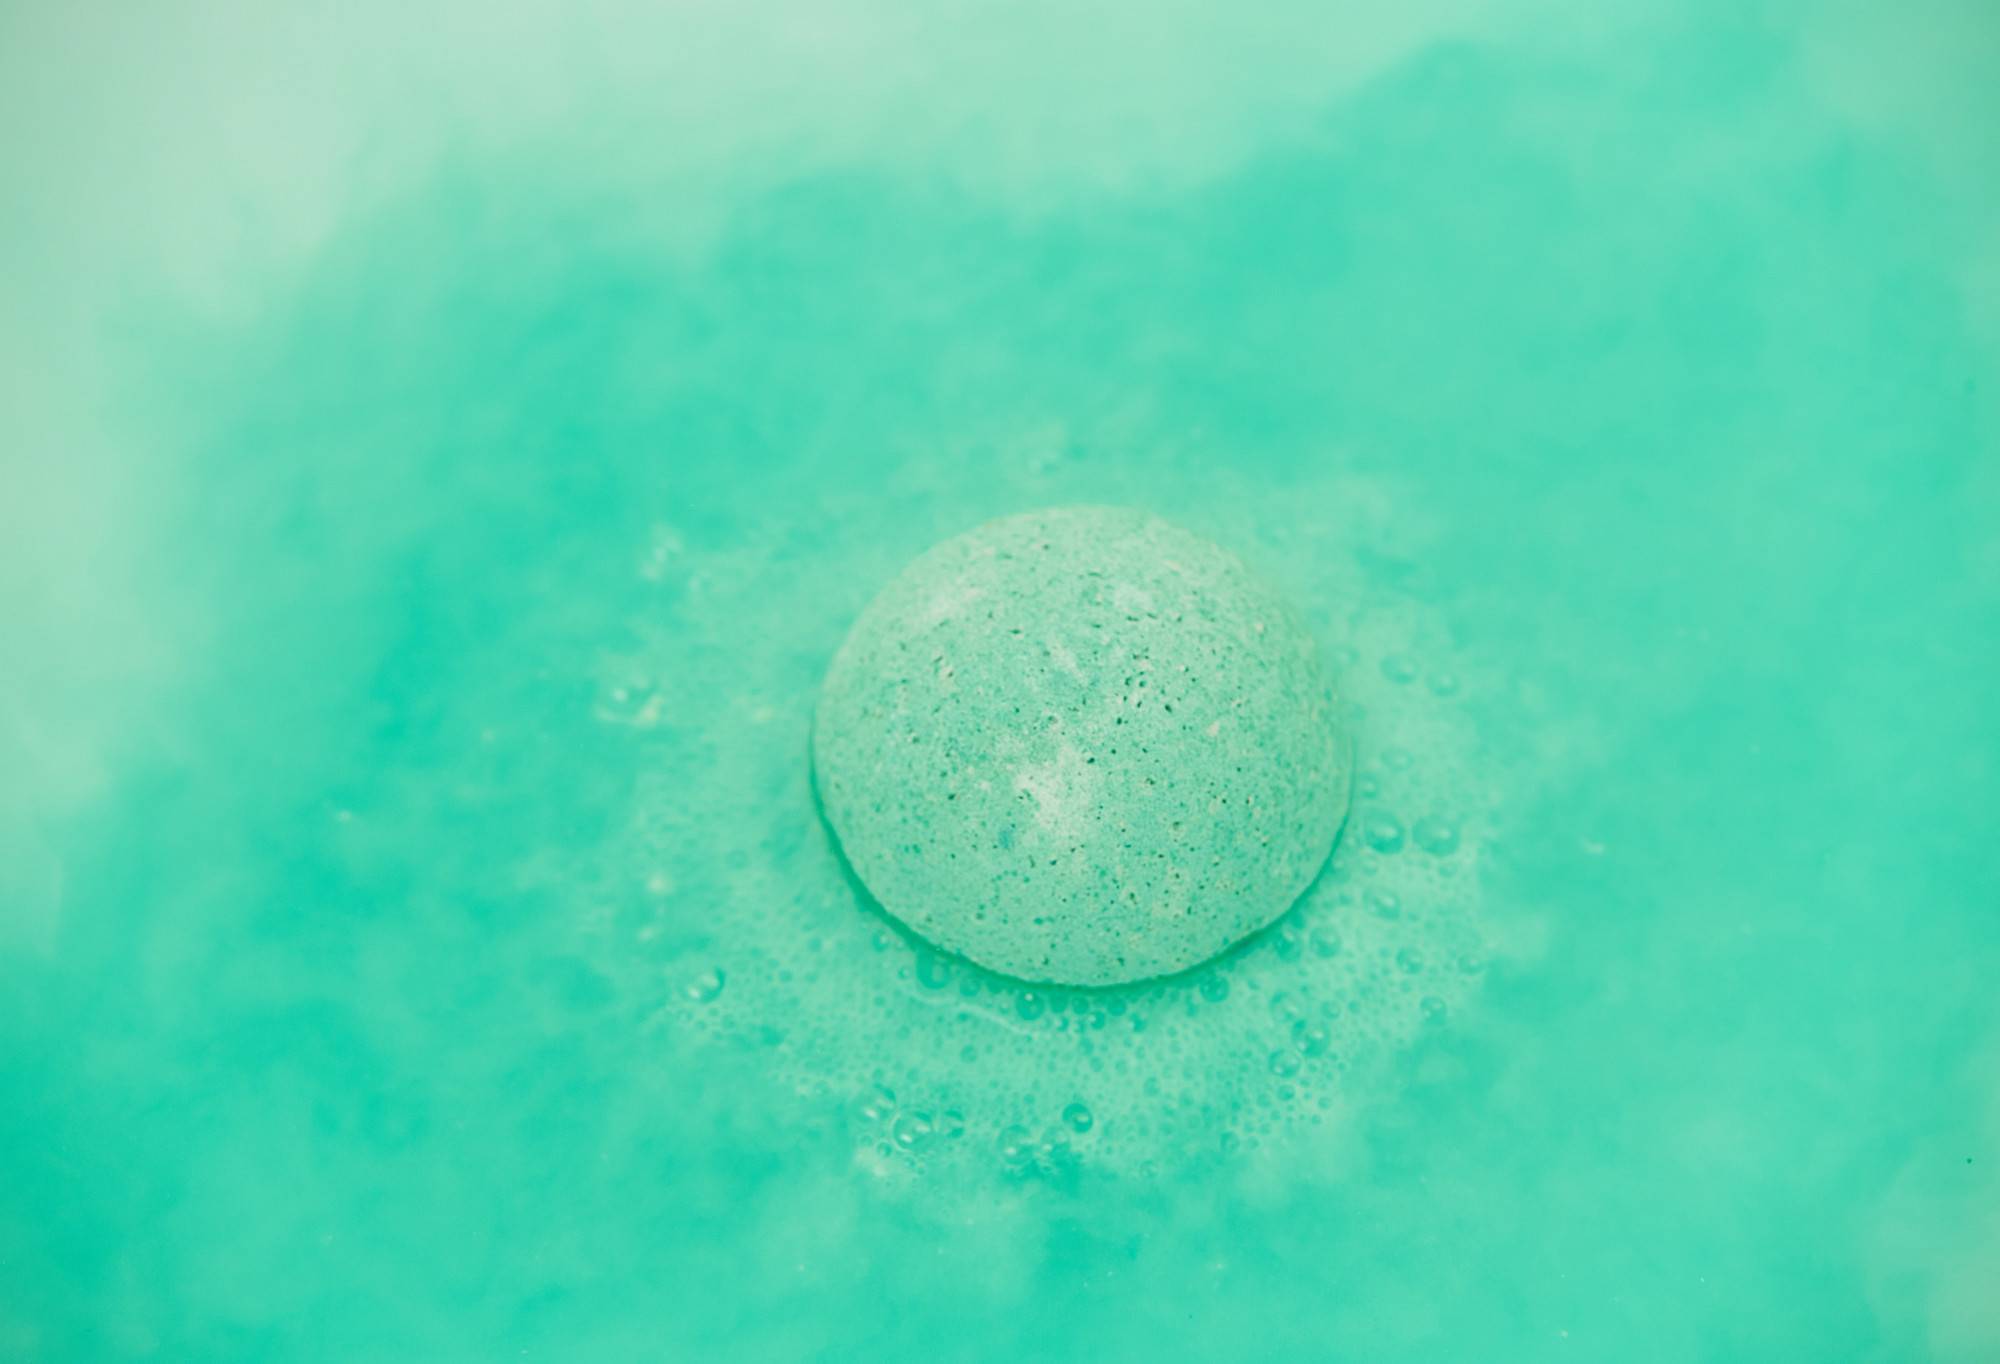 The Avobath bath bomb sits perfectly central, floating on the bathwater surface as it starts to dissolve. There are delicate bubbles being given off and the water is a beautiful, fresh turquoise colour. 